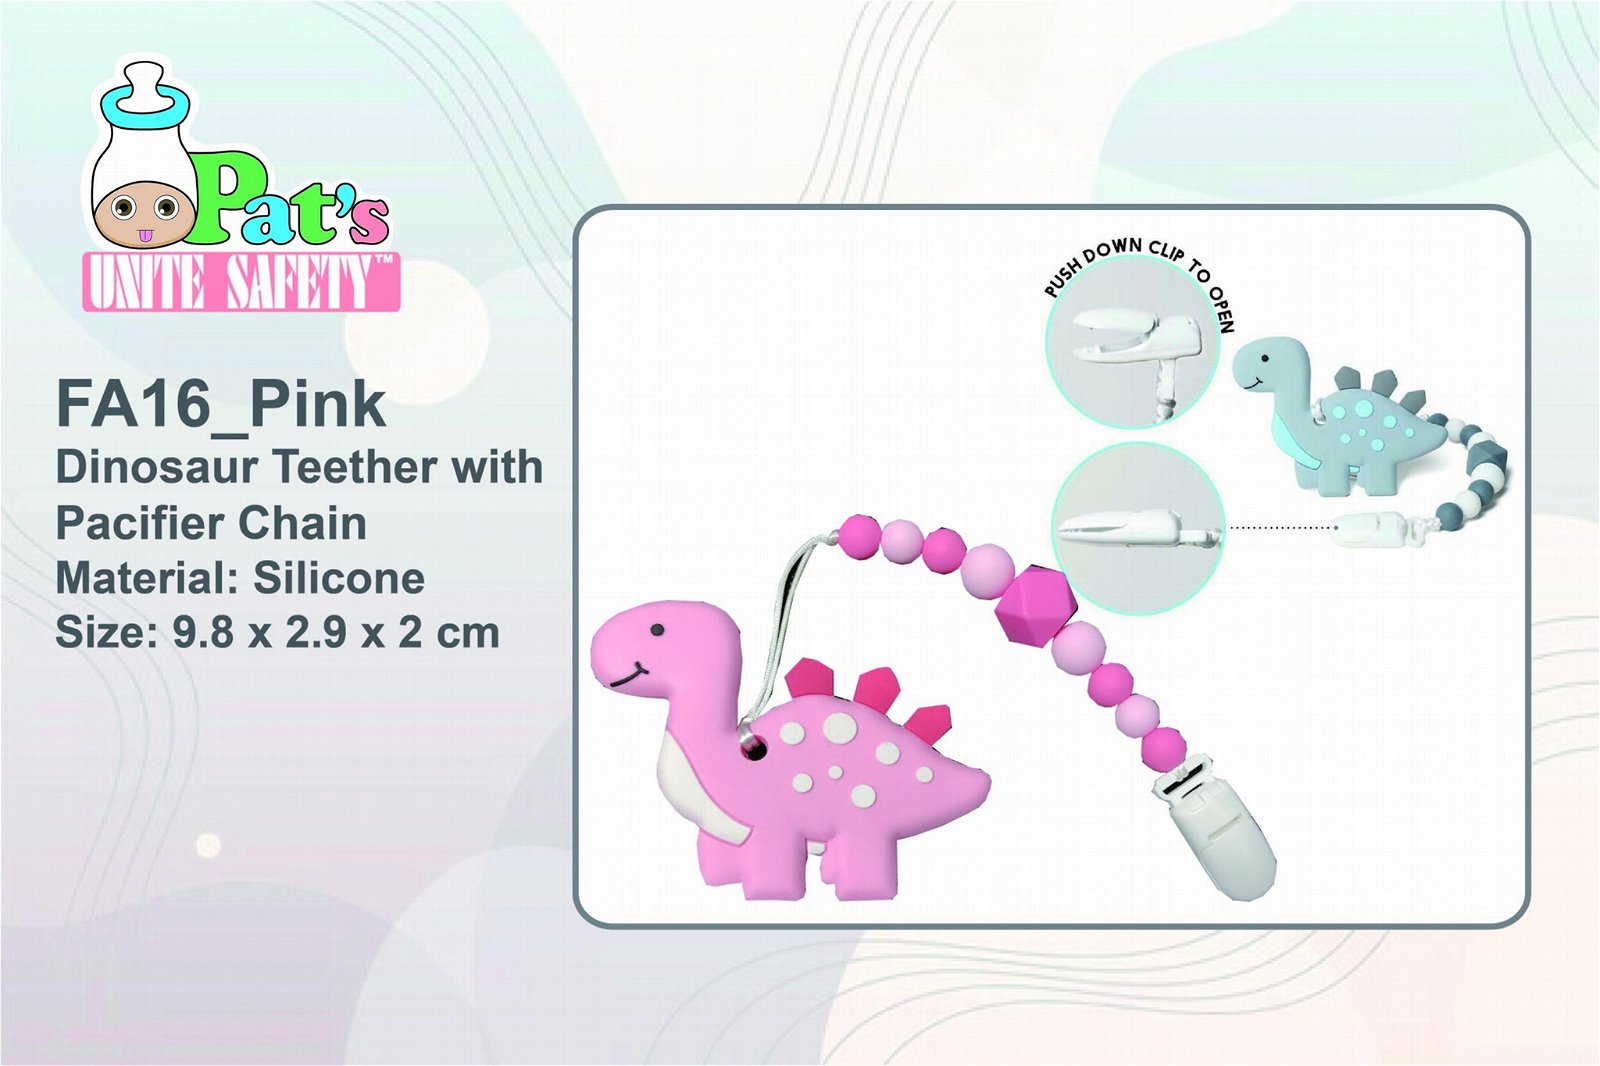 Dinosaur Teether with Pacifier Chain 2